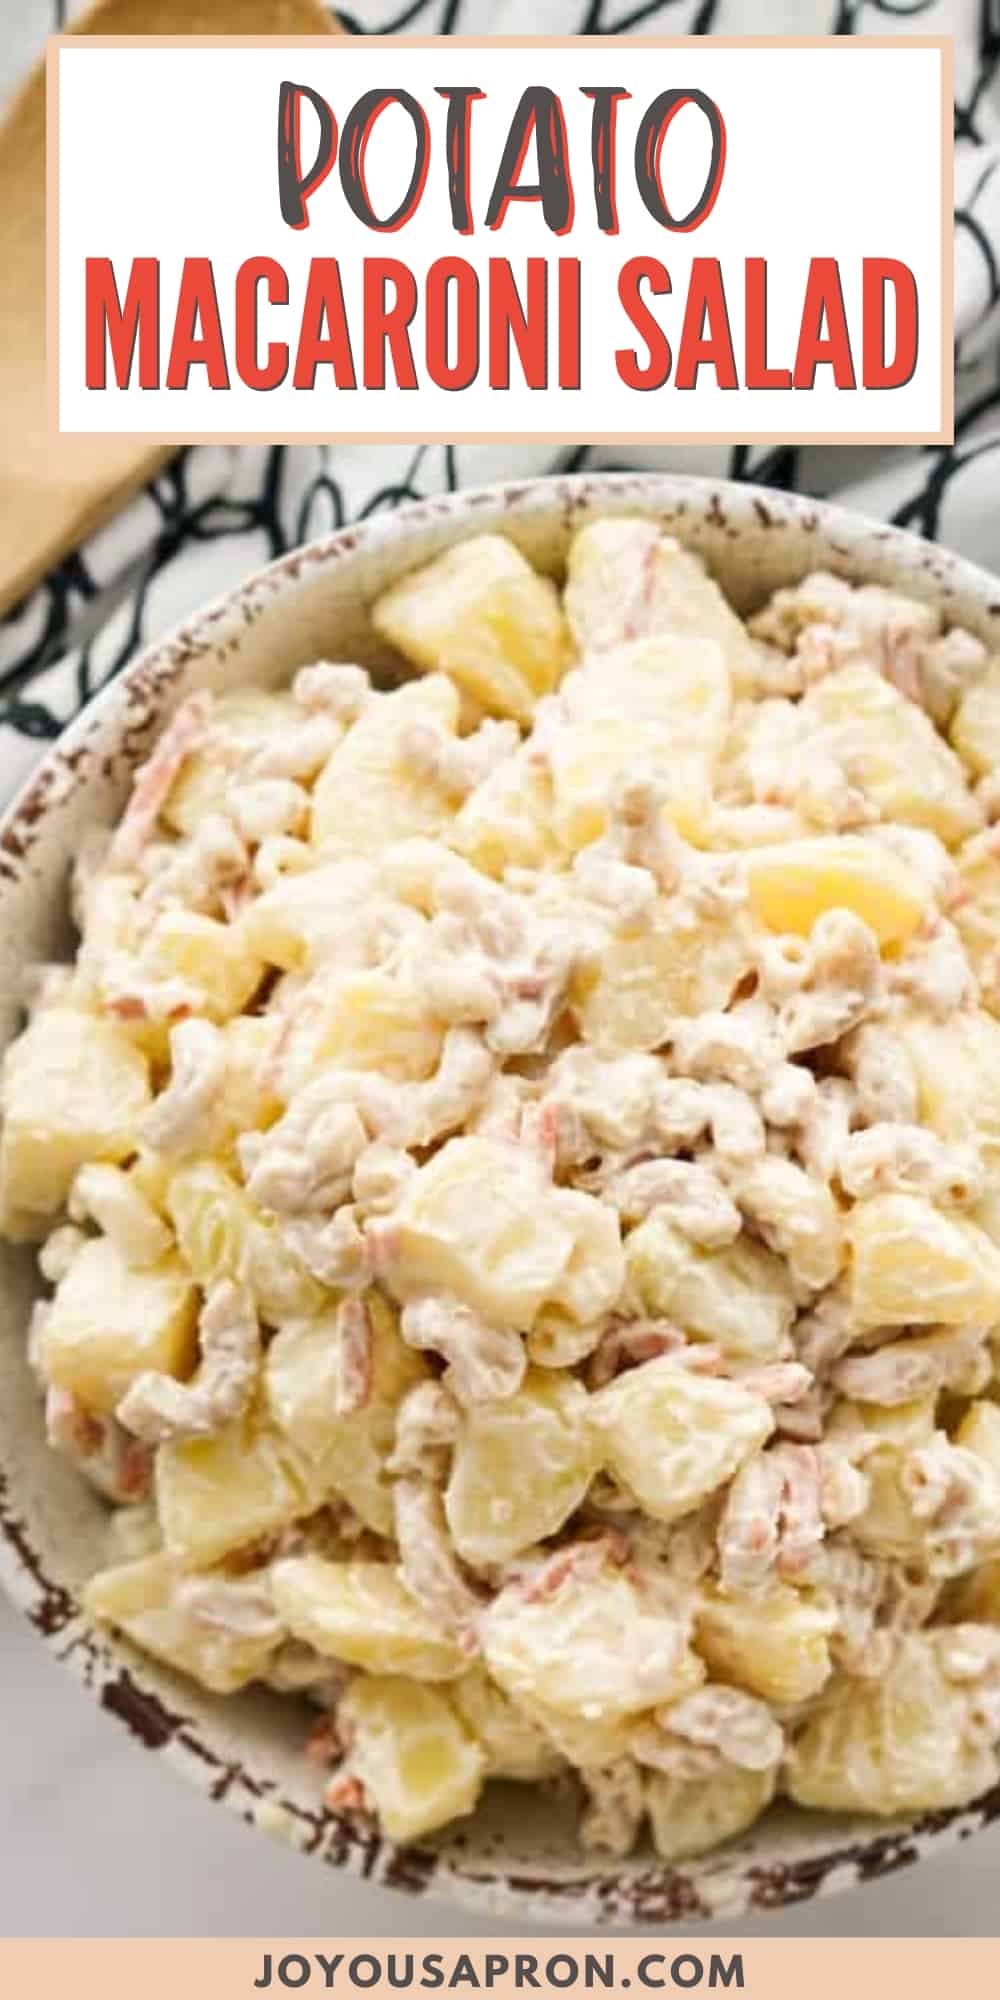 Potato Mac Salad - Hawaiian style potato and mac salad features soft diced potatoes, macaroni, chopped carrots and grated sweet onions tossed in creamy and tangy dressing. via @joyousapron